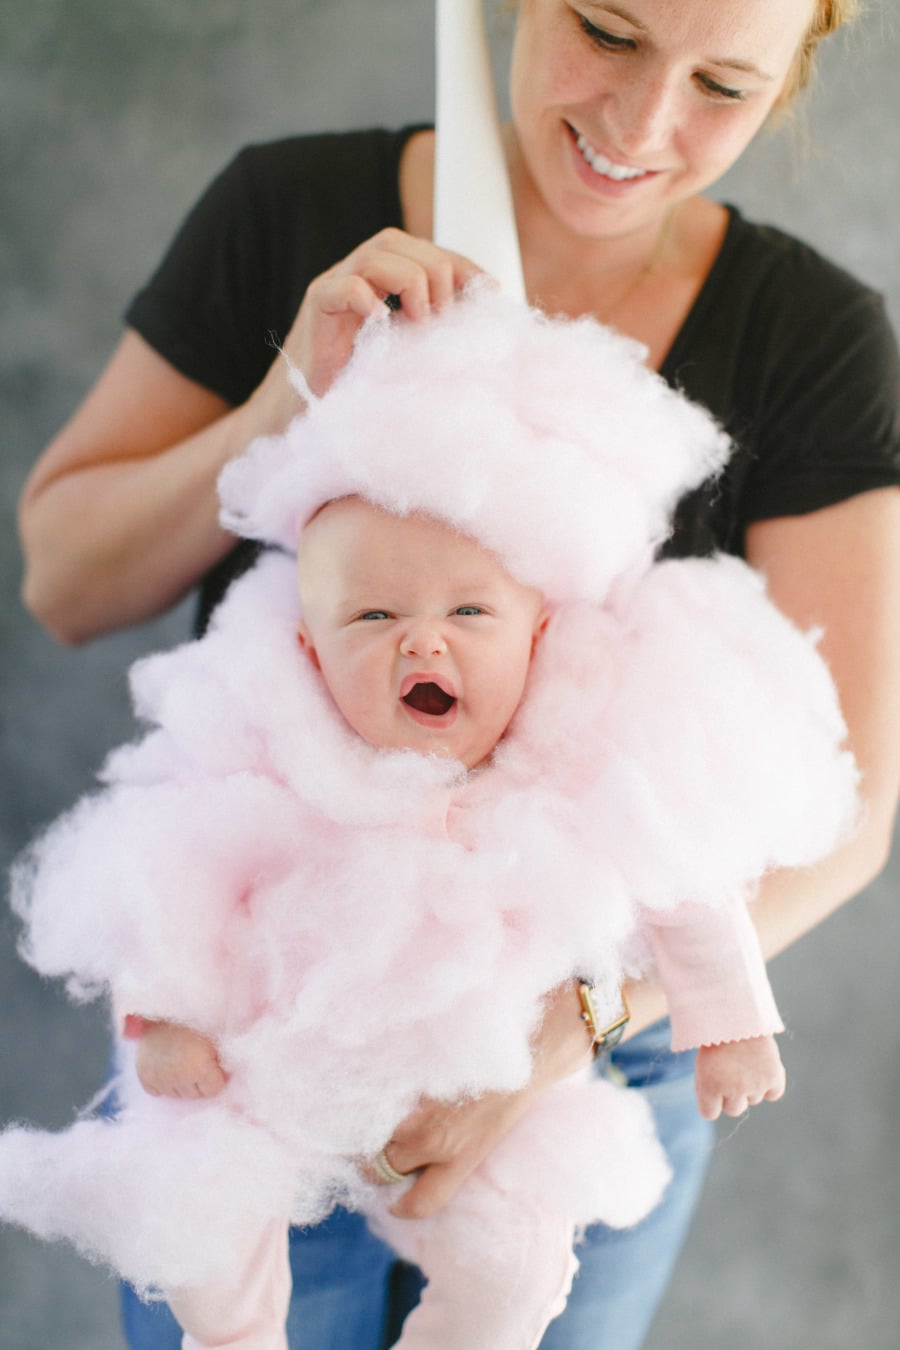 Cotton Candy 26 Of The Most Beautiful Diy Halloween Costumes You Ve Ever Seen Popsugar Family Photo 26